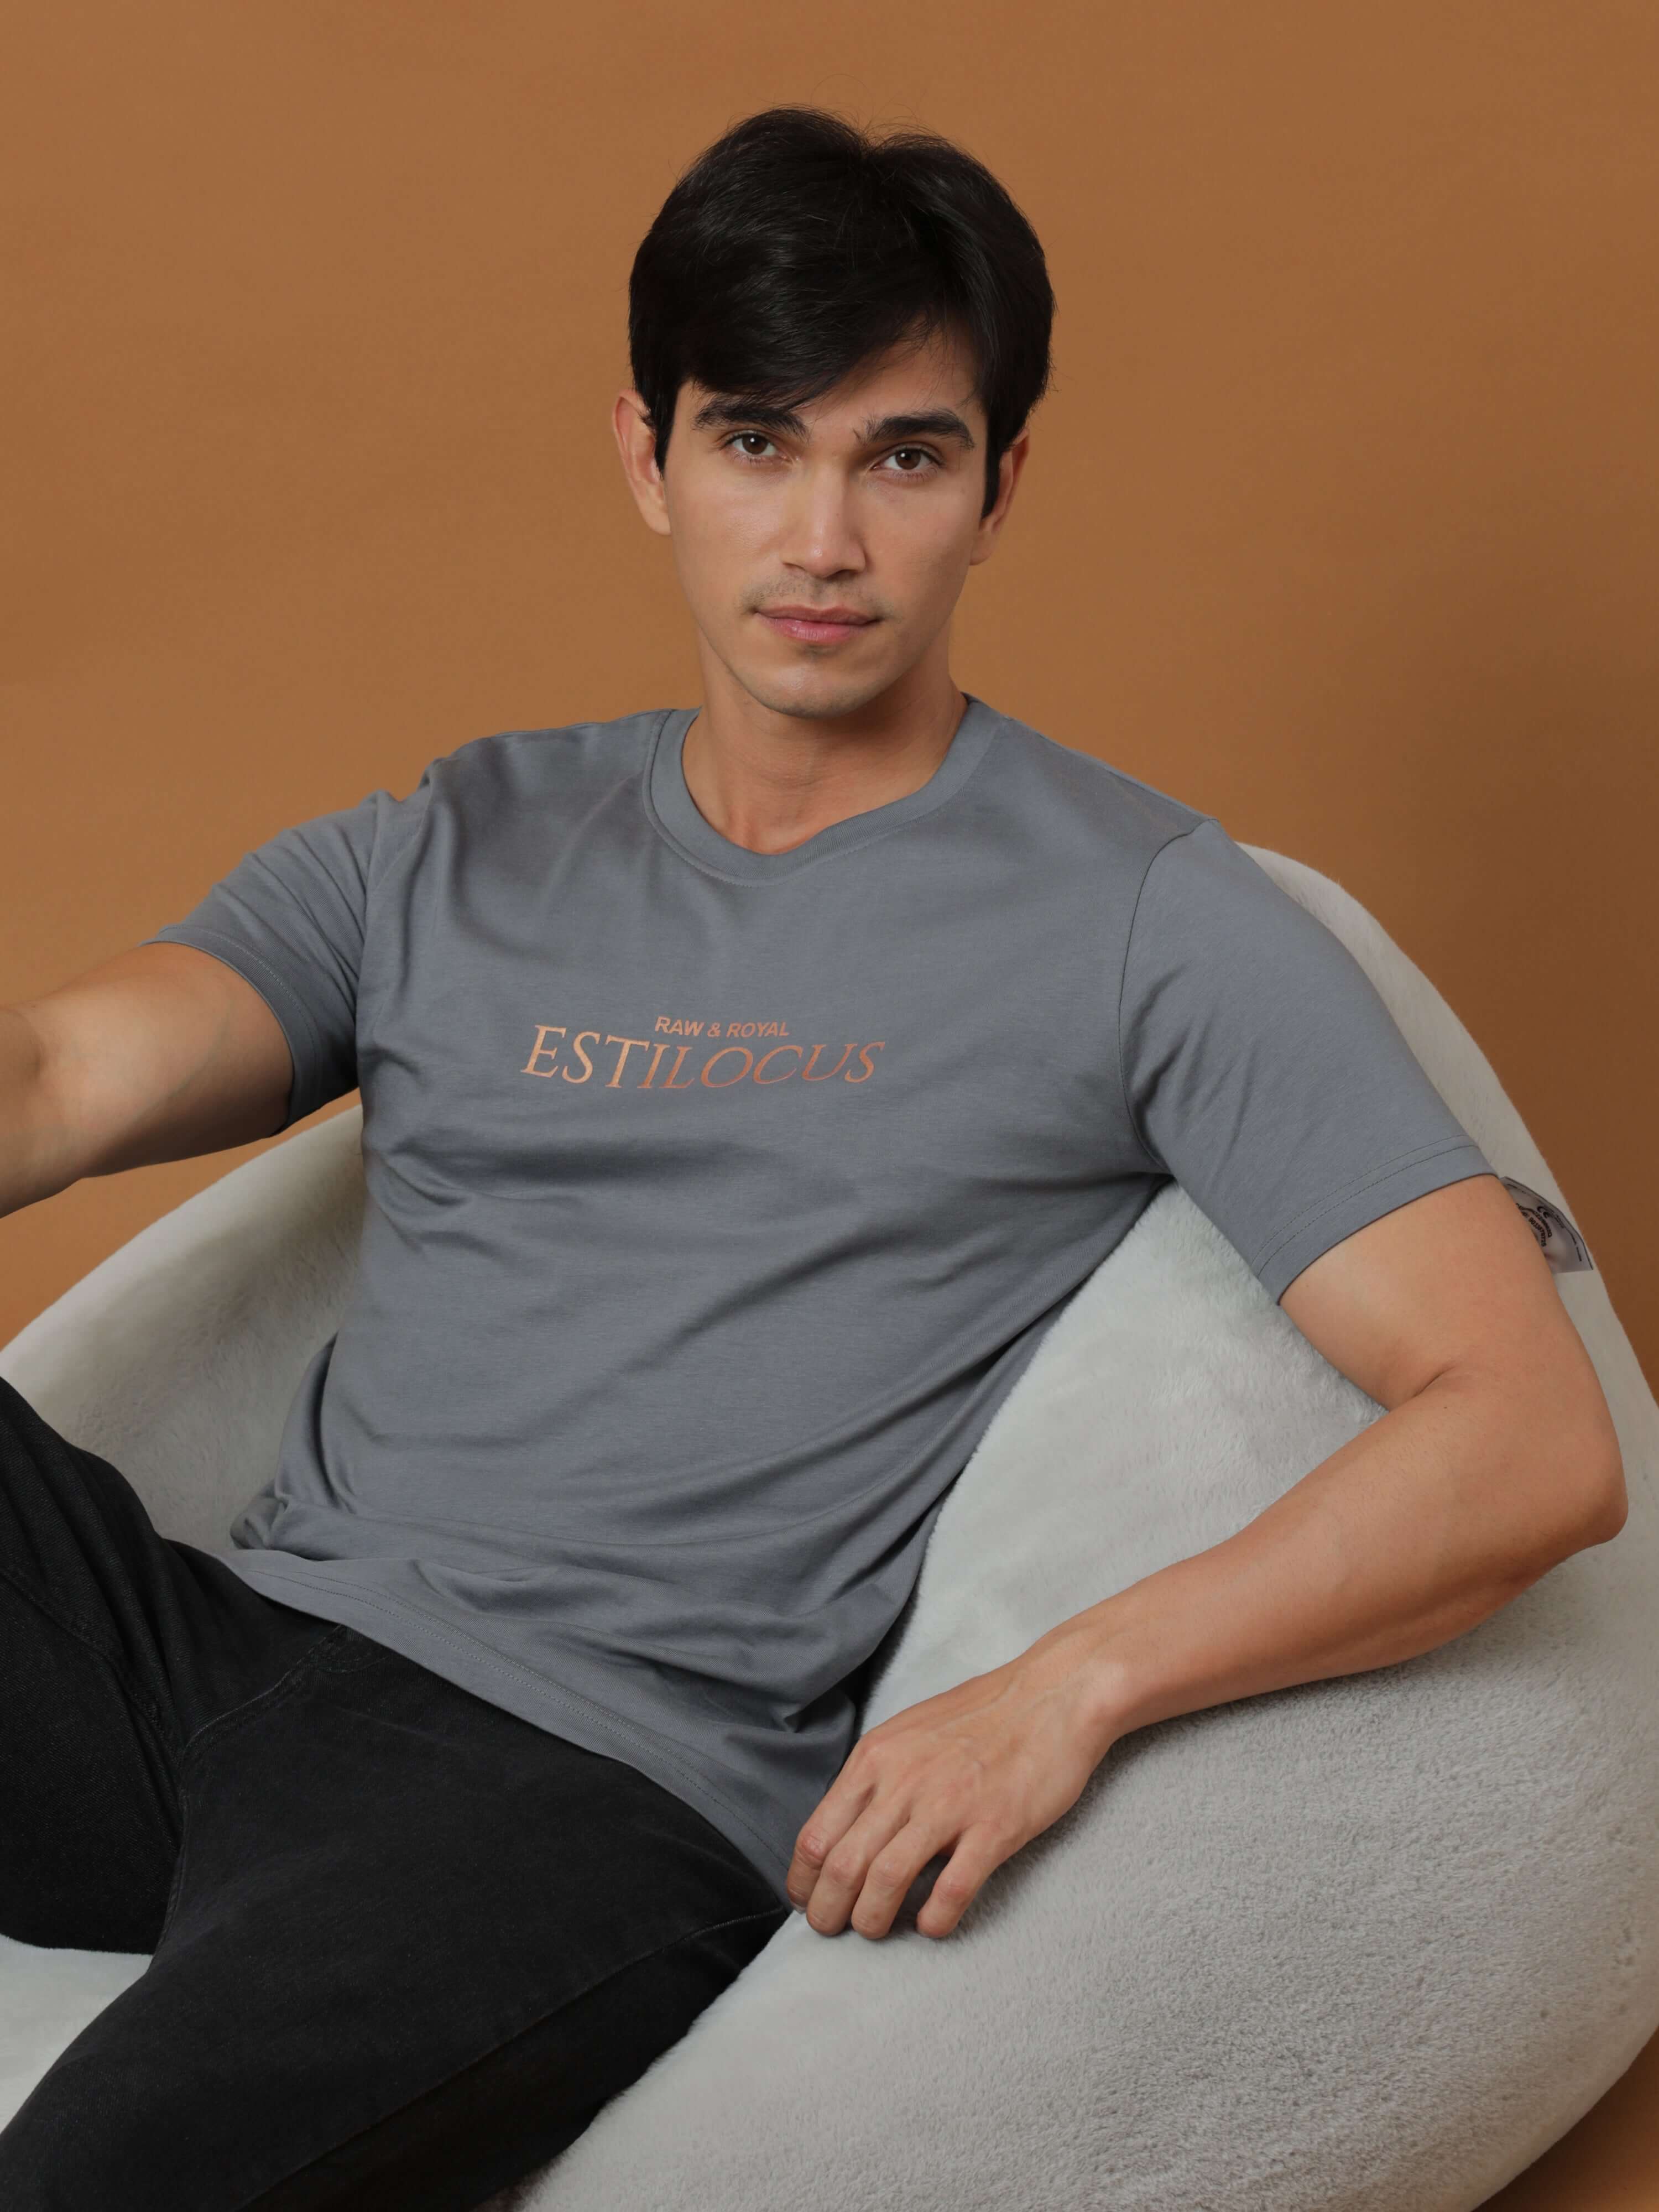 Estilocus Gunmetal Grey Printed T Shirt shop online at Estilocus. 100% Cotton Designed and printed on knitted fabric. The fabric is stretchy and lightweight, with a soft skin feel and no wrinkles. Crew neck collar which is smooth on the neck and keeps you